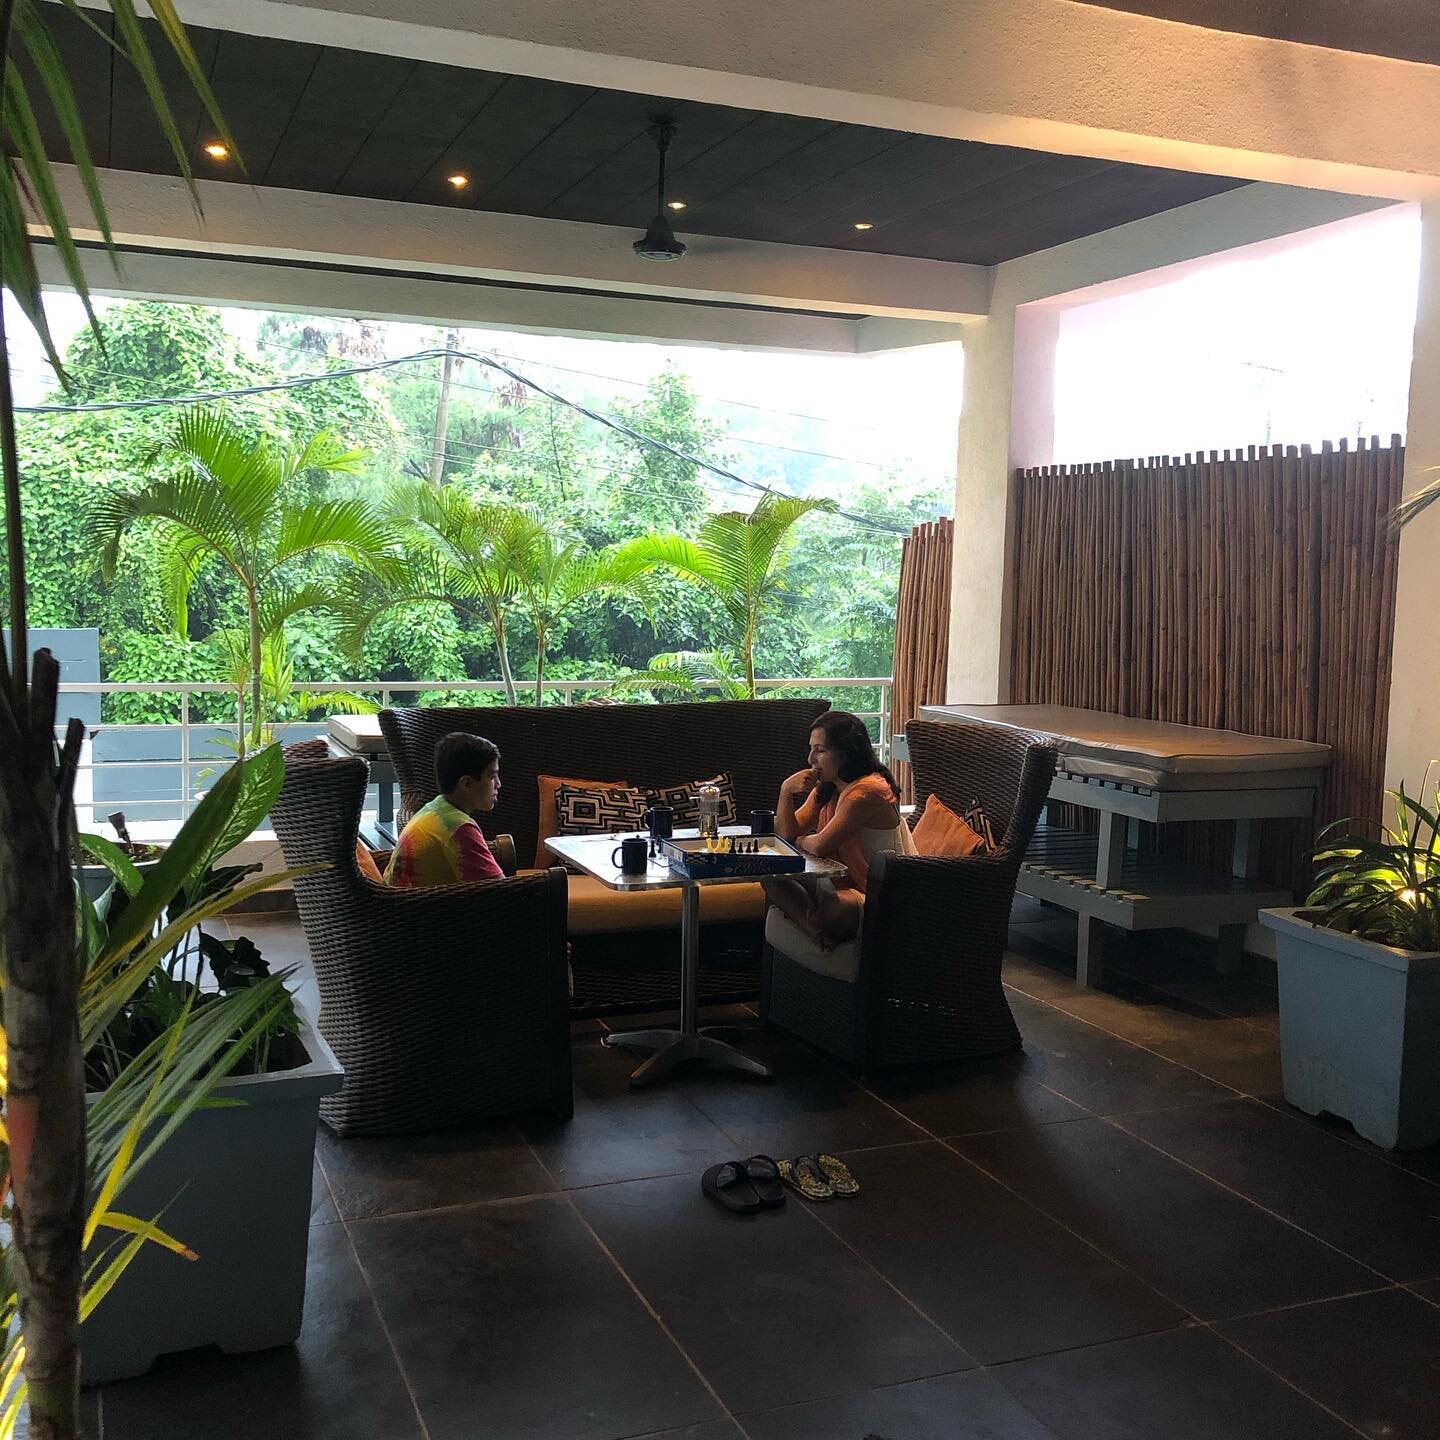 No better way than spending the latest #lockdown in Goa in our apartment lobby with a game of chess, lovely tea and coffee, beautiful sounds of the rain and lush greenery...no complaints, just pure abundance...was a close game, in the end mommy @magn